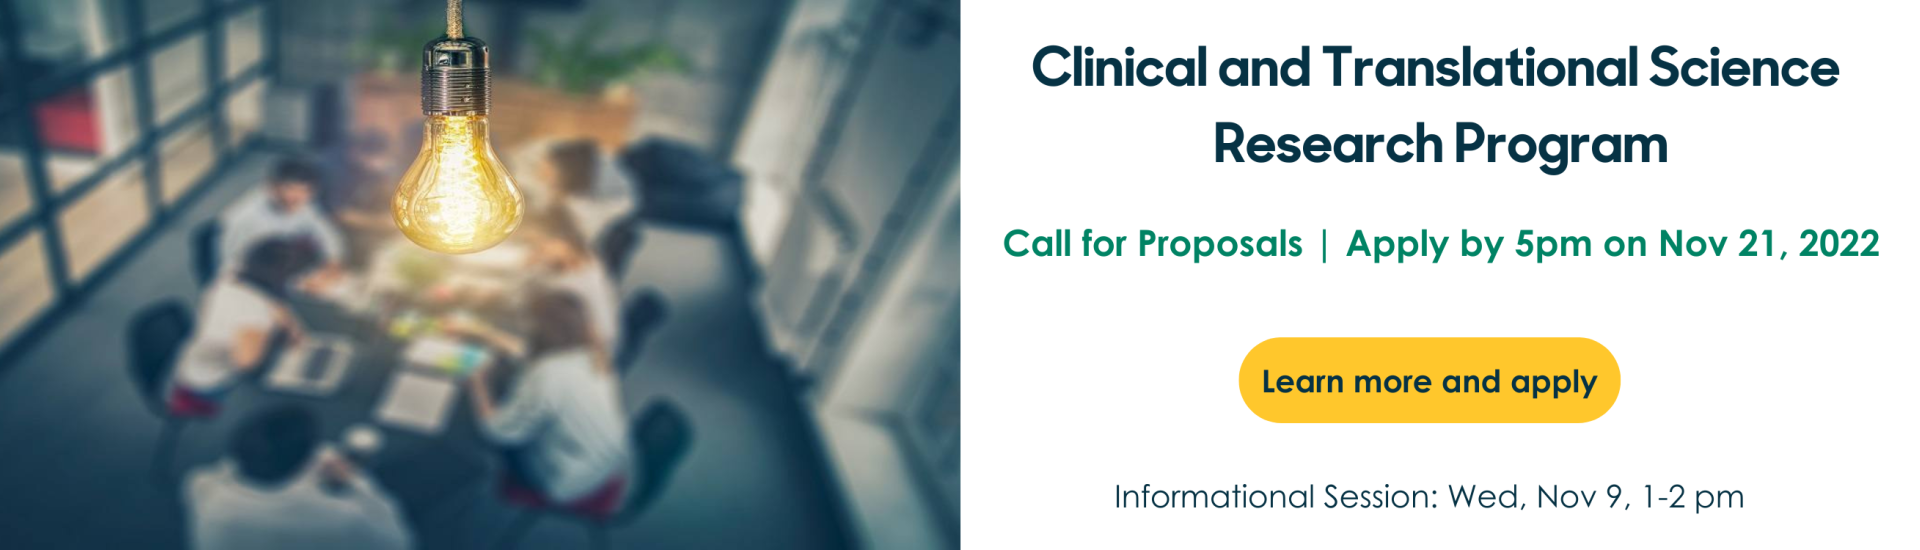 CTS Research Program - call for proposals | apply by 5pm on Nov 21, 2022. Learn more and apply. Info session: Wed, Nov. 9, 1-2pm